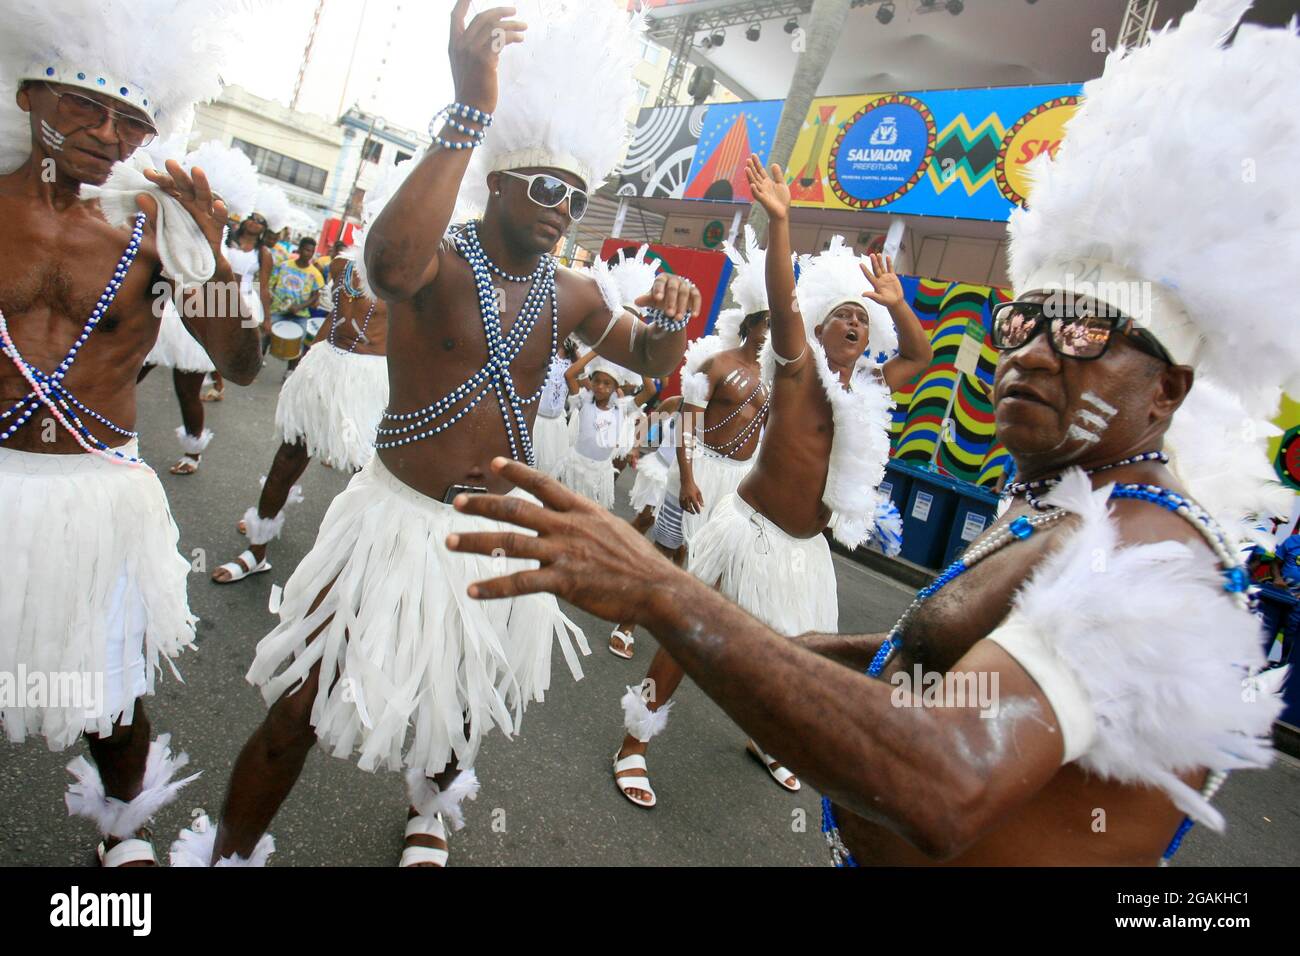 salvador, bahia, brazil - february 24, 2017: Members of the Commanches carnival block are seen during a parade on the Salvador city's carnival circuit Stock Photo